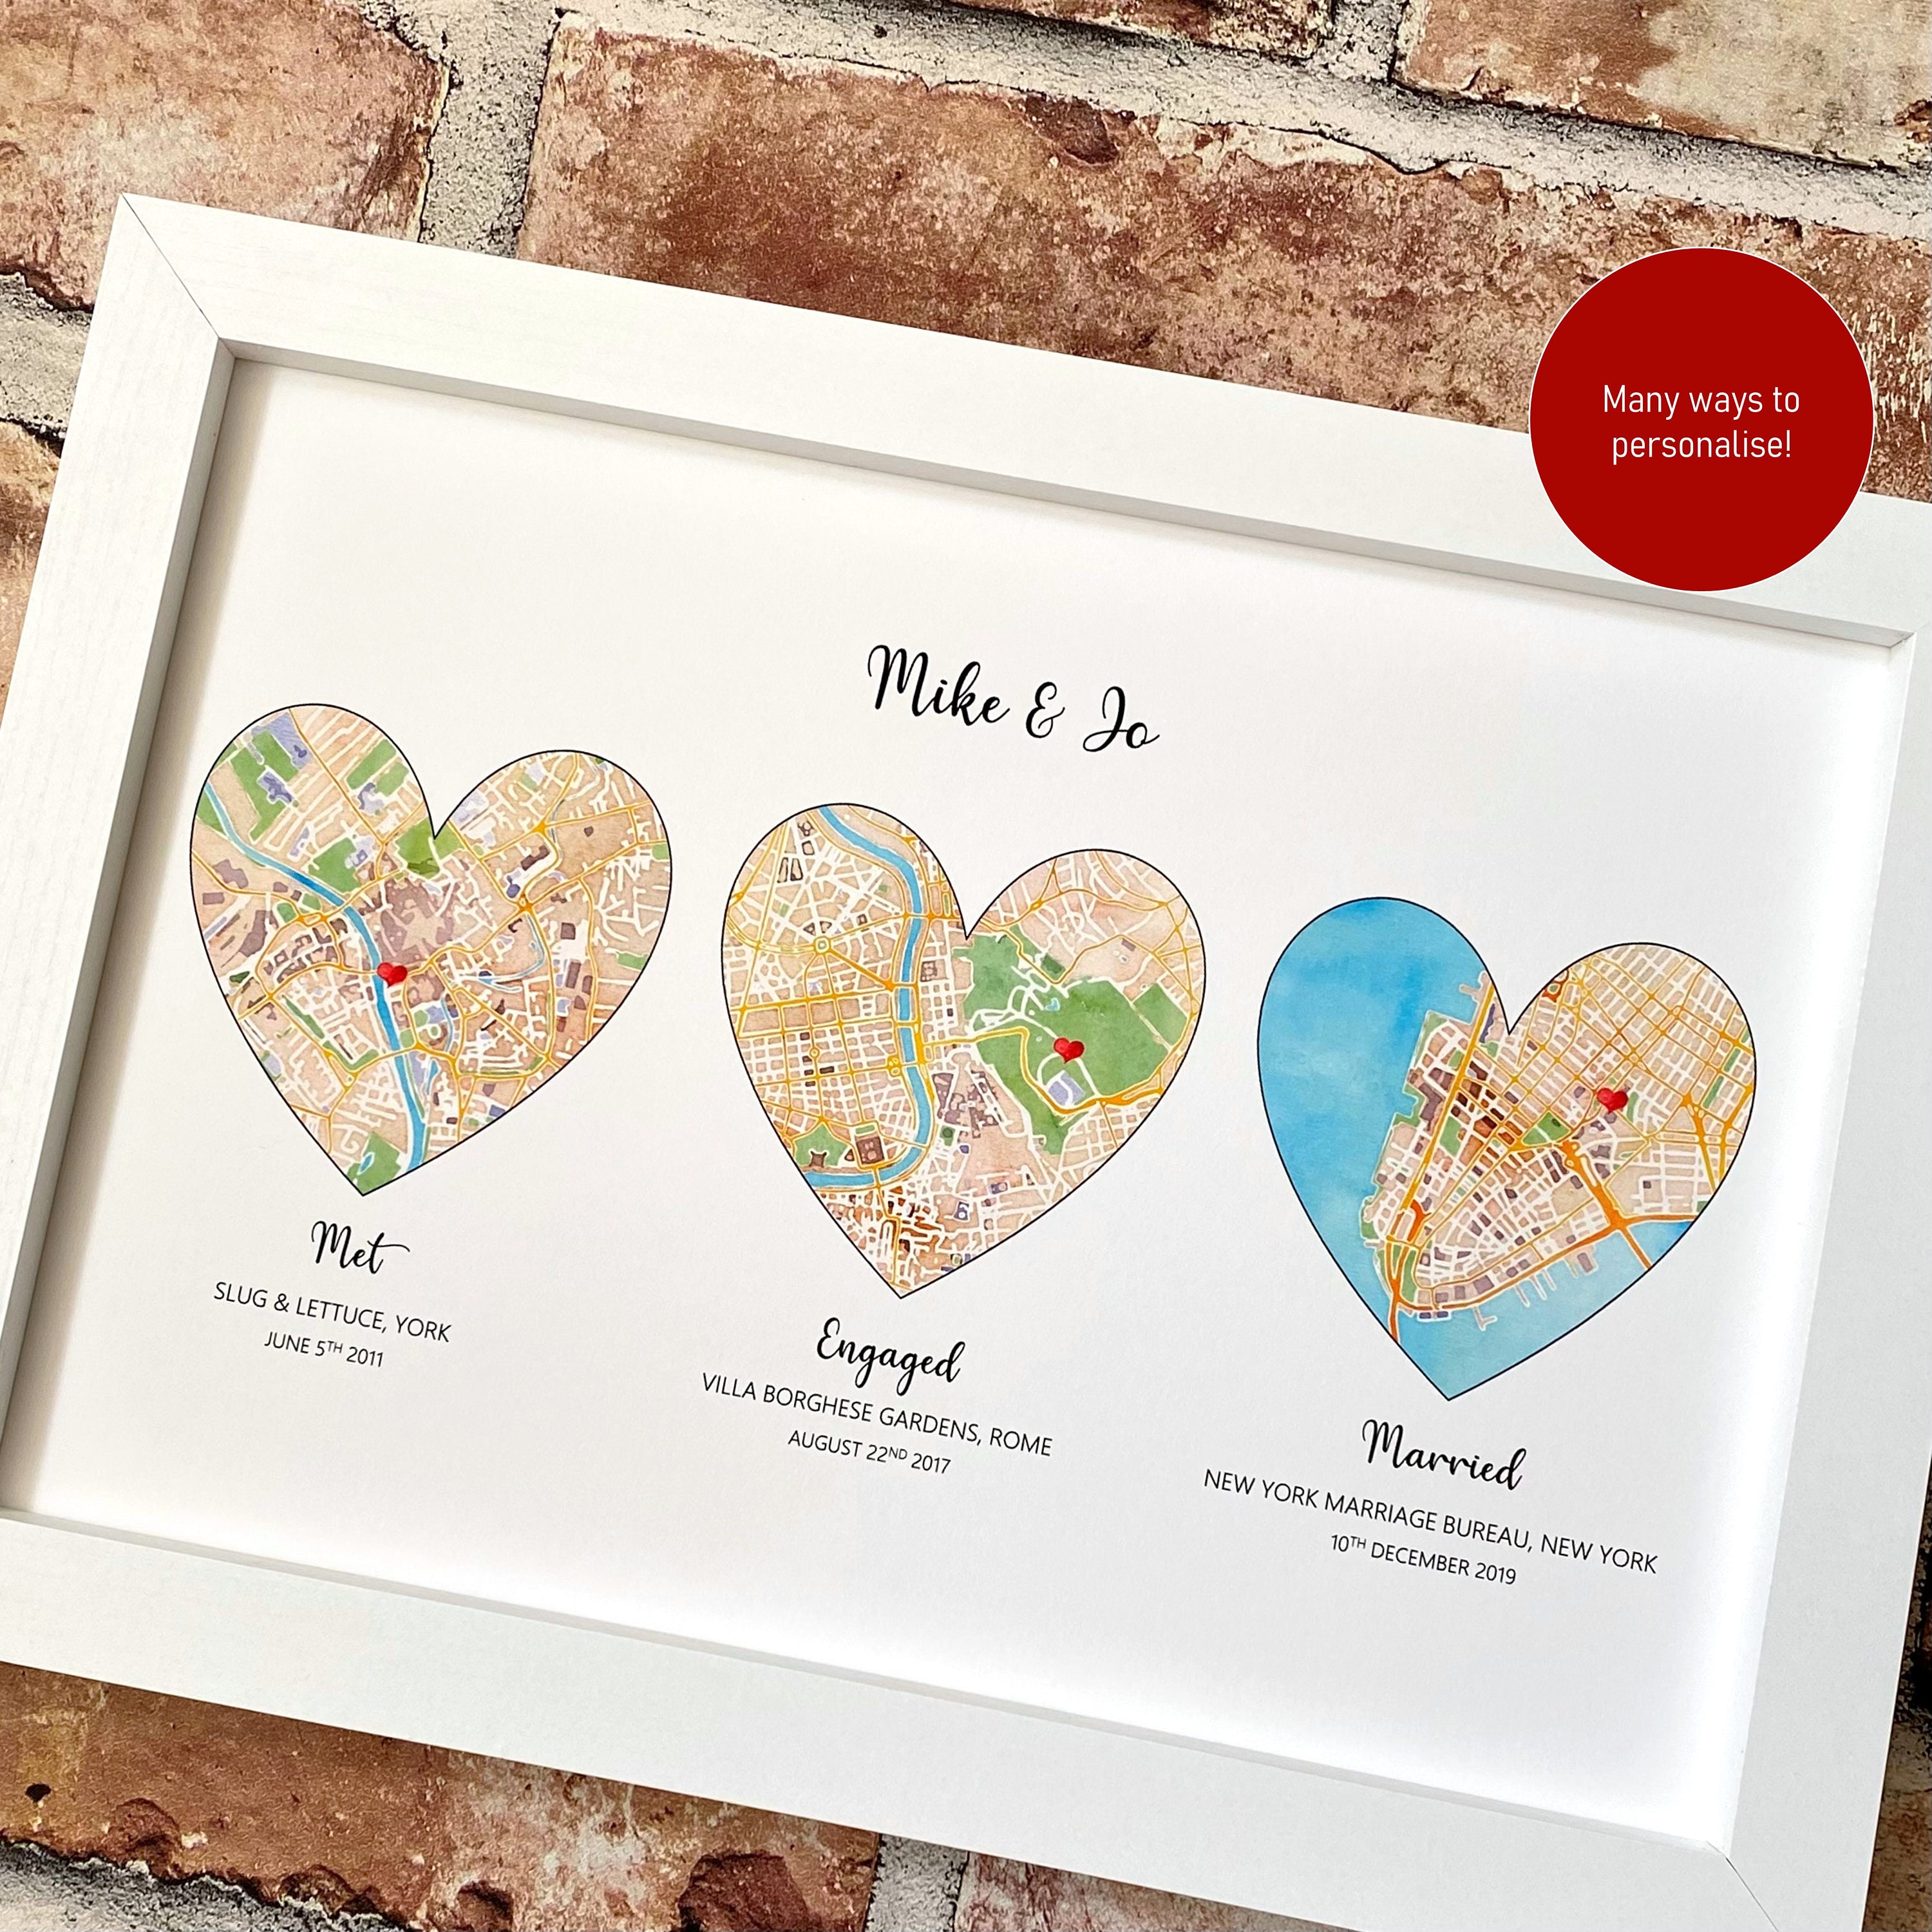 Met engaged married love story map custom map gift unique wedding map gift engagement gift for couple personalised watercolor map art